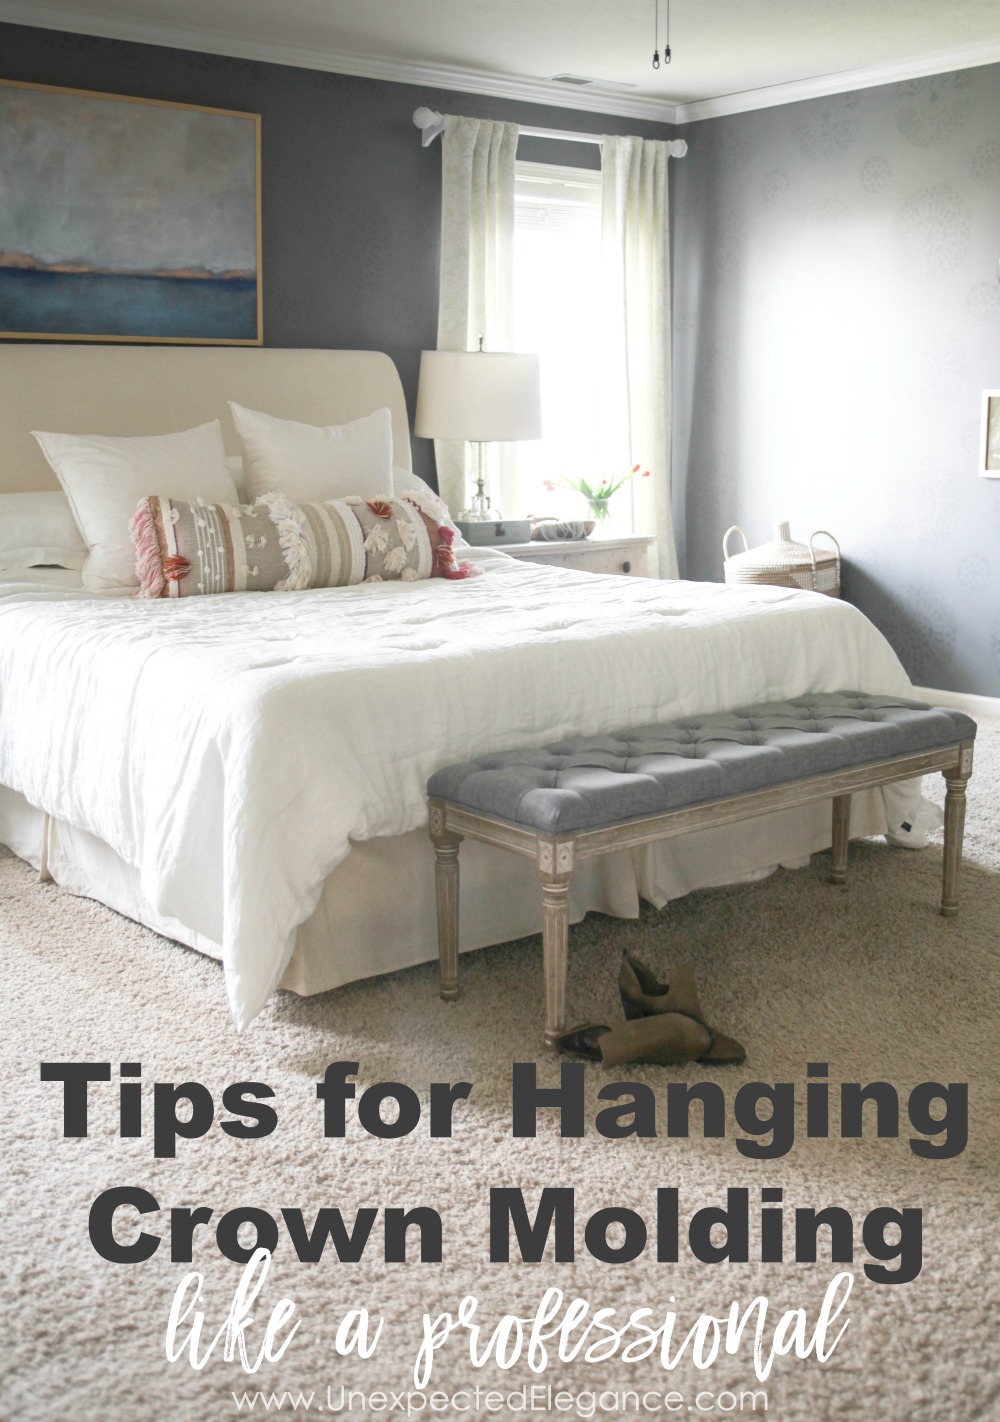 Get some tips for hanging crown molding, so you can get the professional finish. Best part is you will save some money!